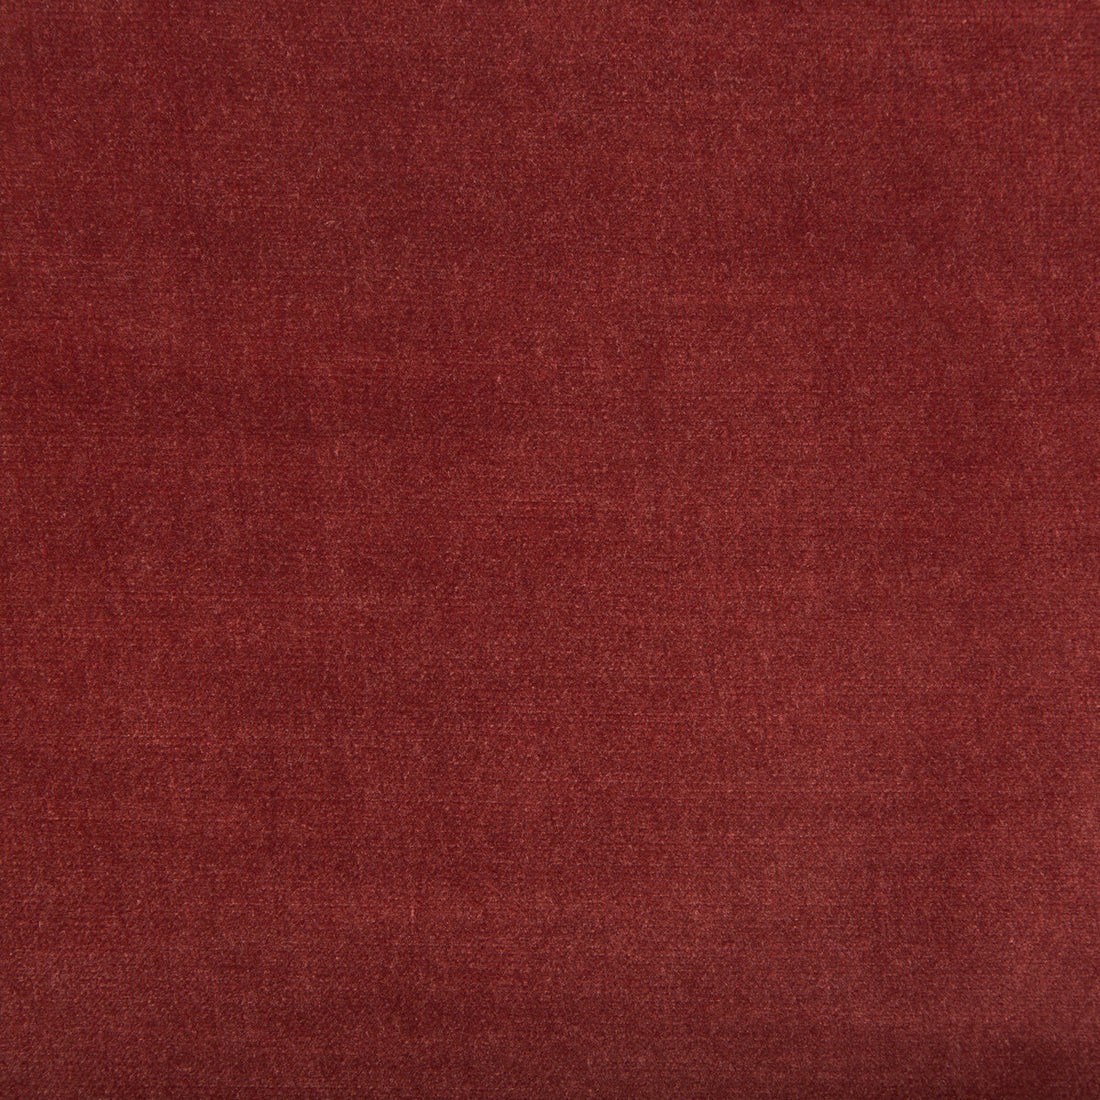 Chessford fabric in cranberry color - pattern 35360.909.0 - by Kravet Smart in the Performance collection